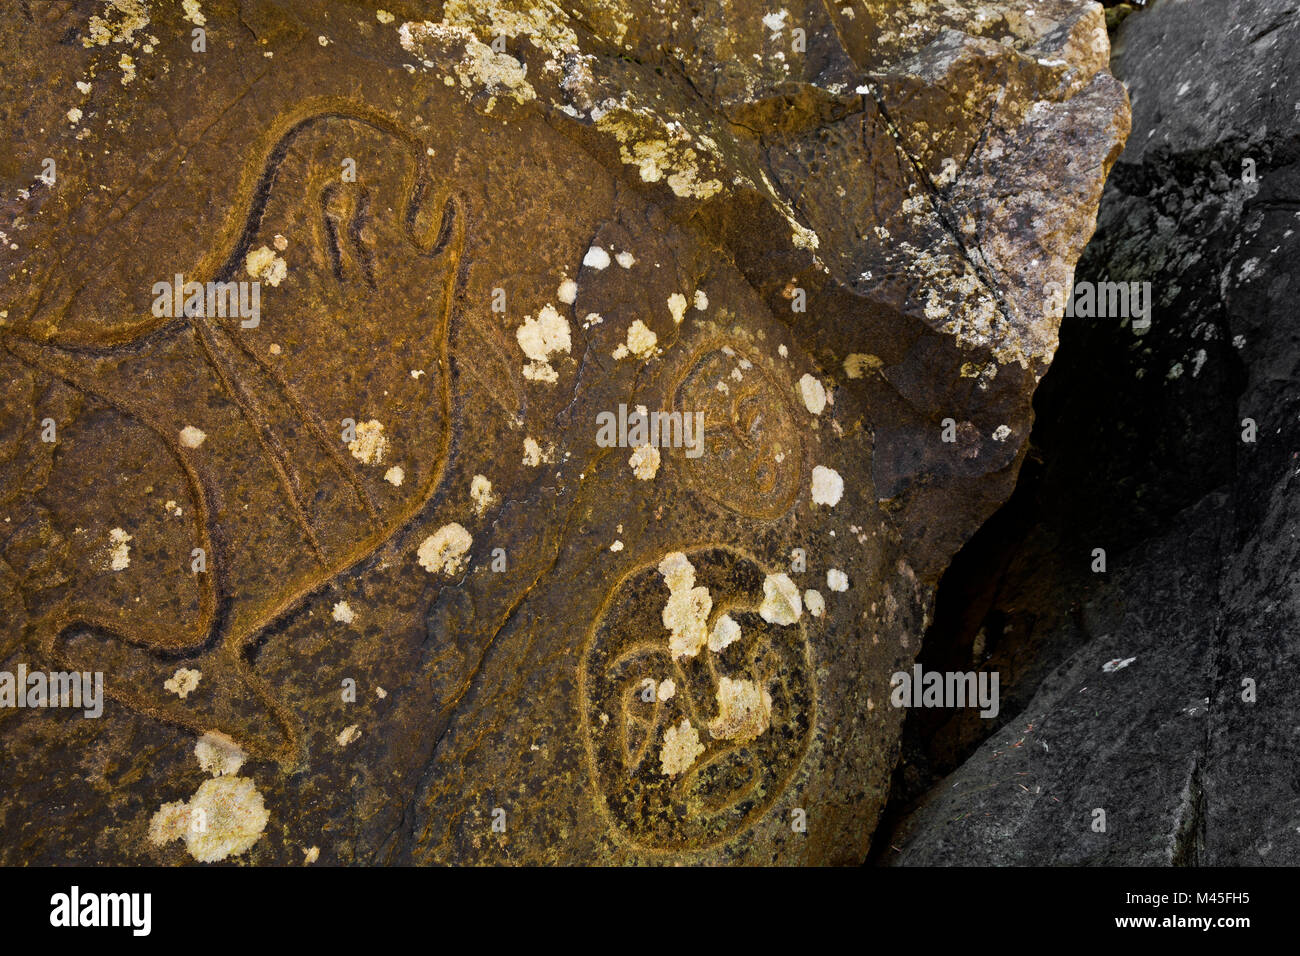 WA13433-00...WASHINGTON - Native American petroglyphs depicting a whale and two faces along the Pacific Coast at Wedding Rock om Olympic View Drive. Stock Photo